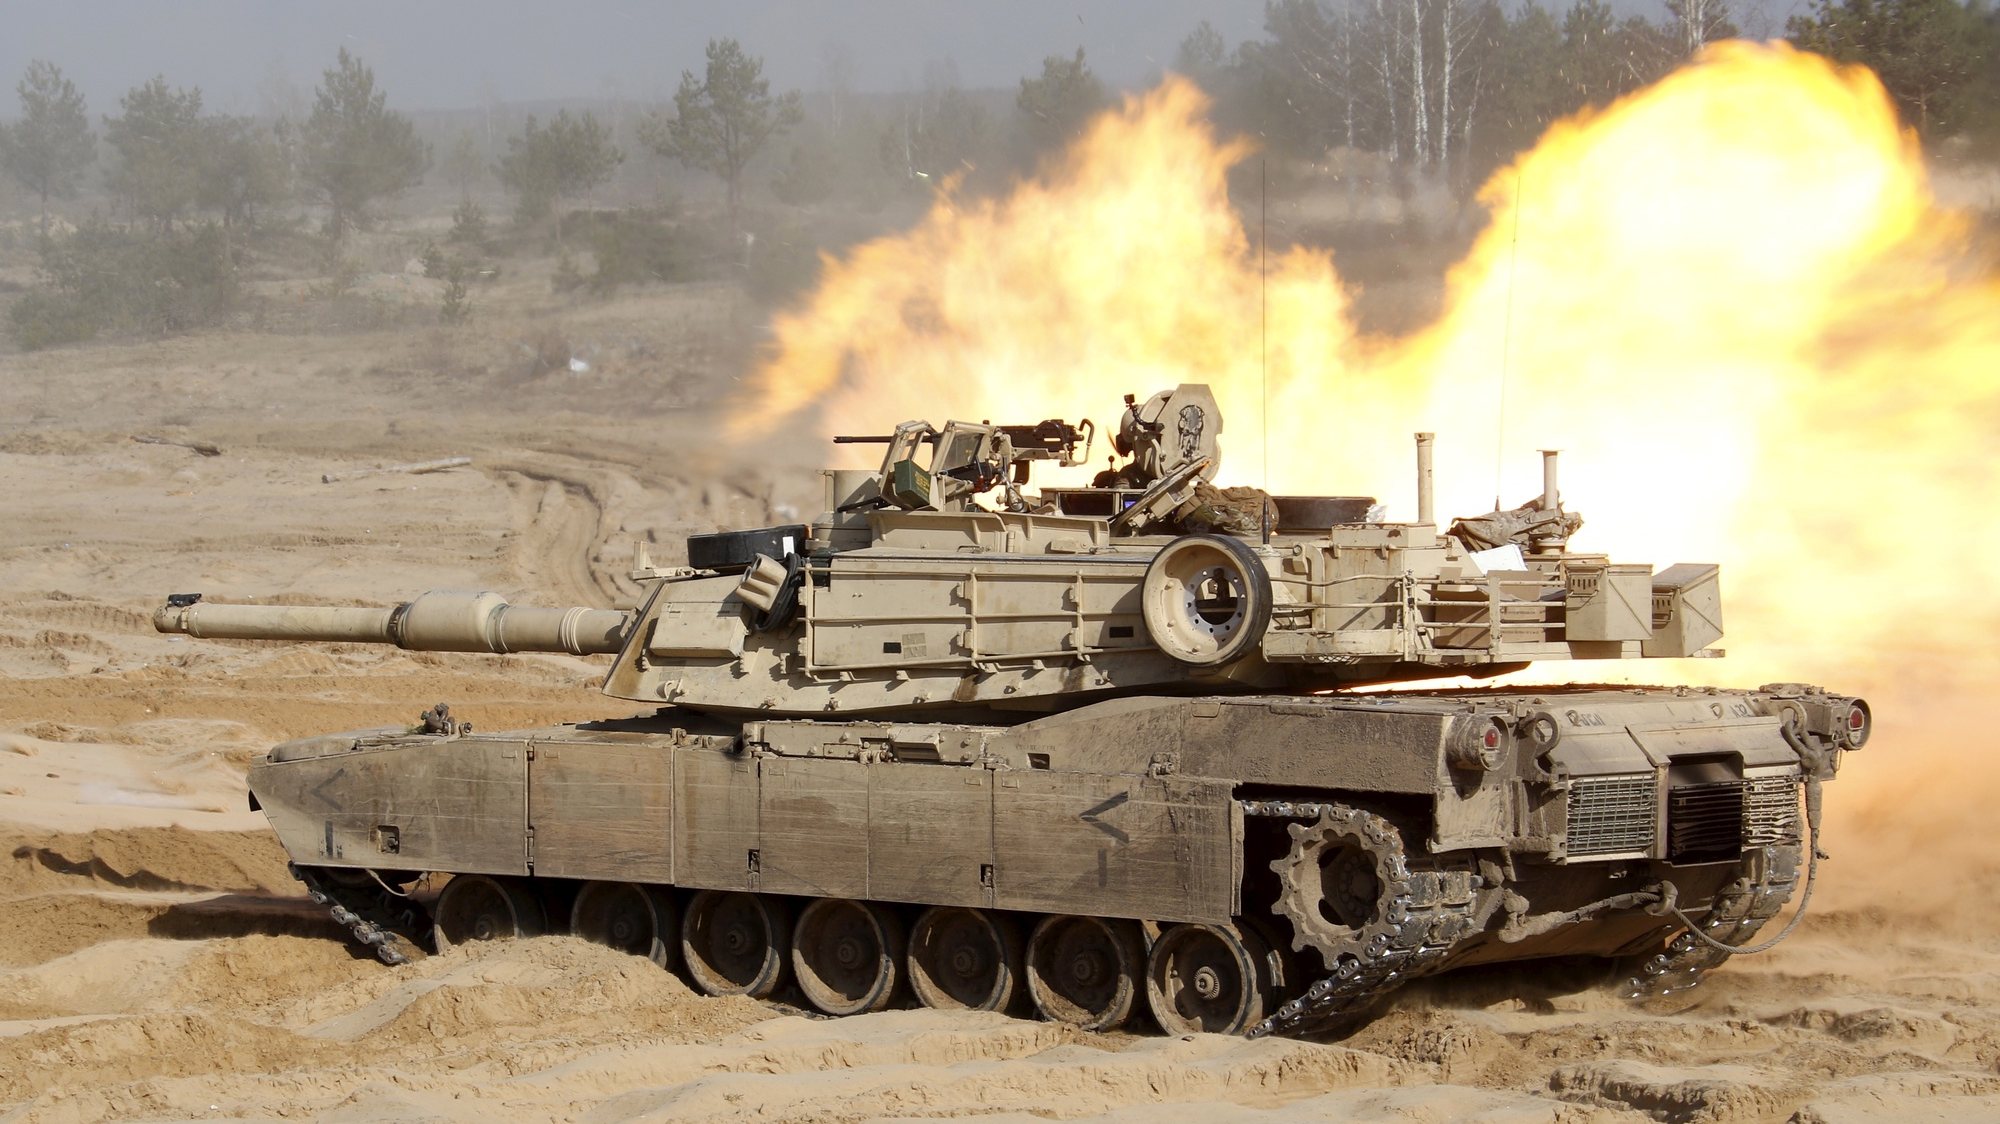 epa10429124 (FILE) - U.S. soldiers of the NATO Extended Presence Battlegroup with their &#039;M1A1 Abrams&#039; battle tank participiate in the military exercise Crystal Arrow 2021 in Adazi Militari base, Latvia, 26 March 2021 (reissued 25 January 2023). The US are to send some 31 of their M1 Abrams tanks to the Ukraine, US President Biden announced on 25 January 2023. The annnouncement comes the same day Germany cleared the way for deliveries of German-made Leopard 2 tanks to the Ukraine. Russian troops entered Ukraine territory on 24 February 2022, starting an armed conflict that has provoked destruction and a humanitarian crisis.  EPA/VALDA KALNINA *** Local Caption *** 56789482